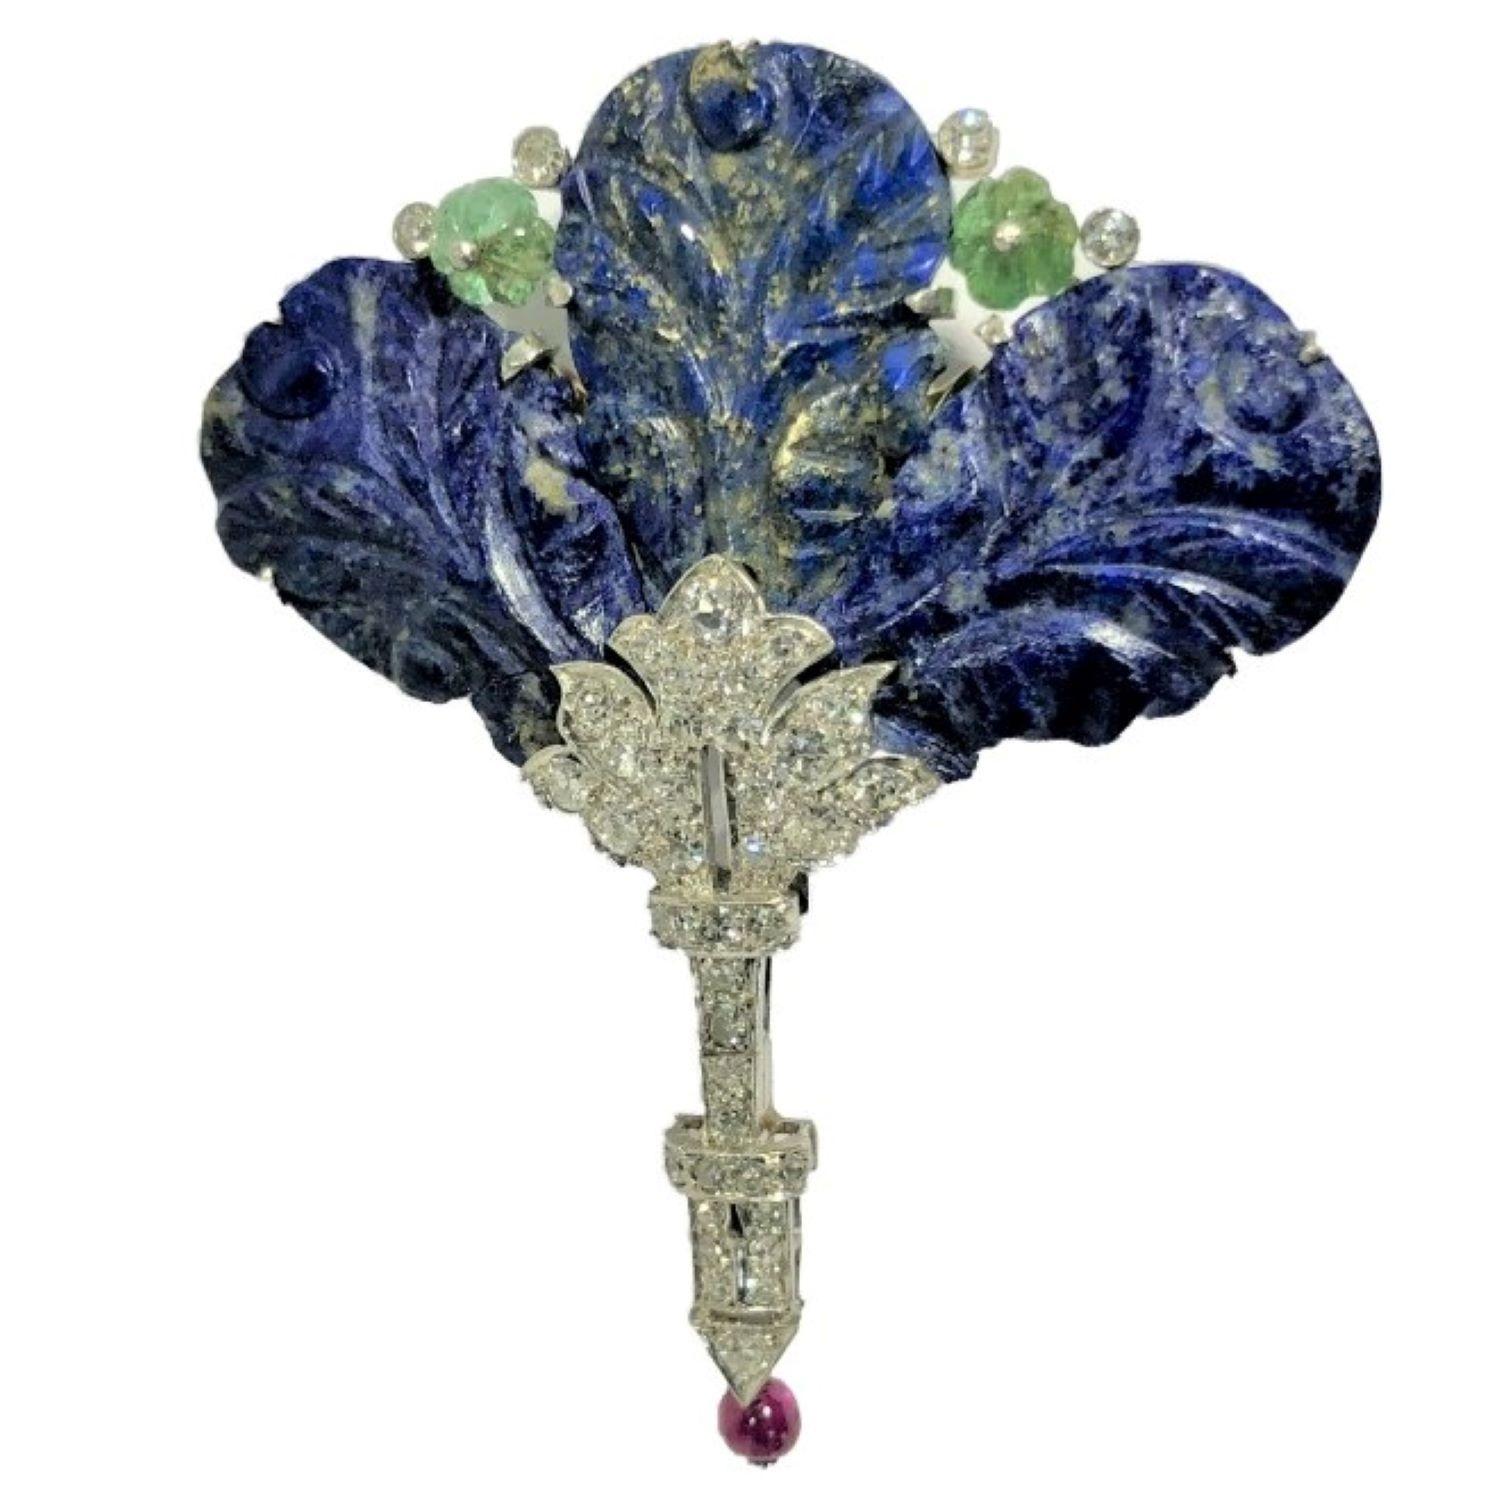 This exquisite and highly stylized platinum floral creation incorporates three carved lapis lazuli panels, two fluted emerald beads, a single ruby bead and diamonds, all set in a handmade frame crafted specifically for this masterwork. The